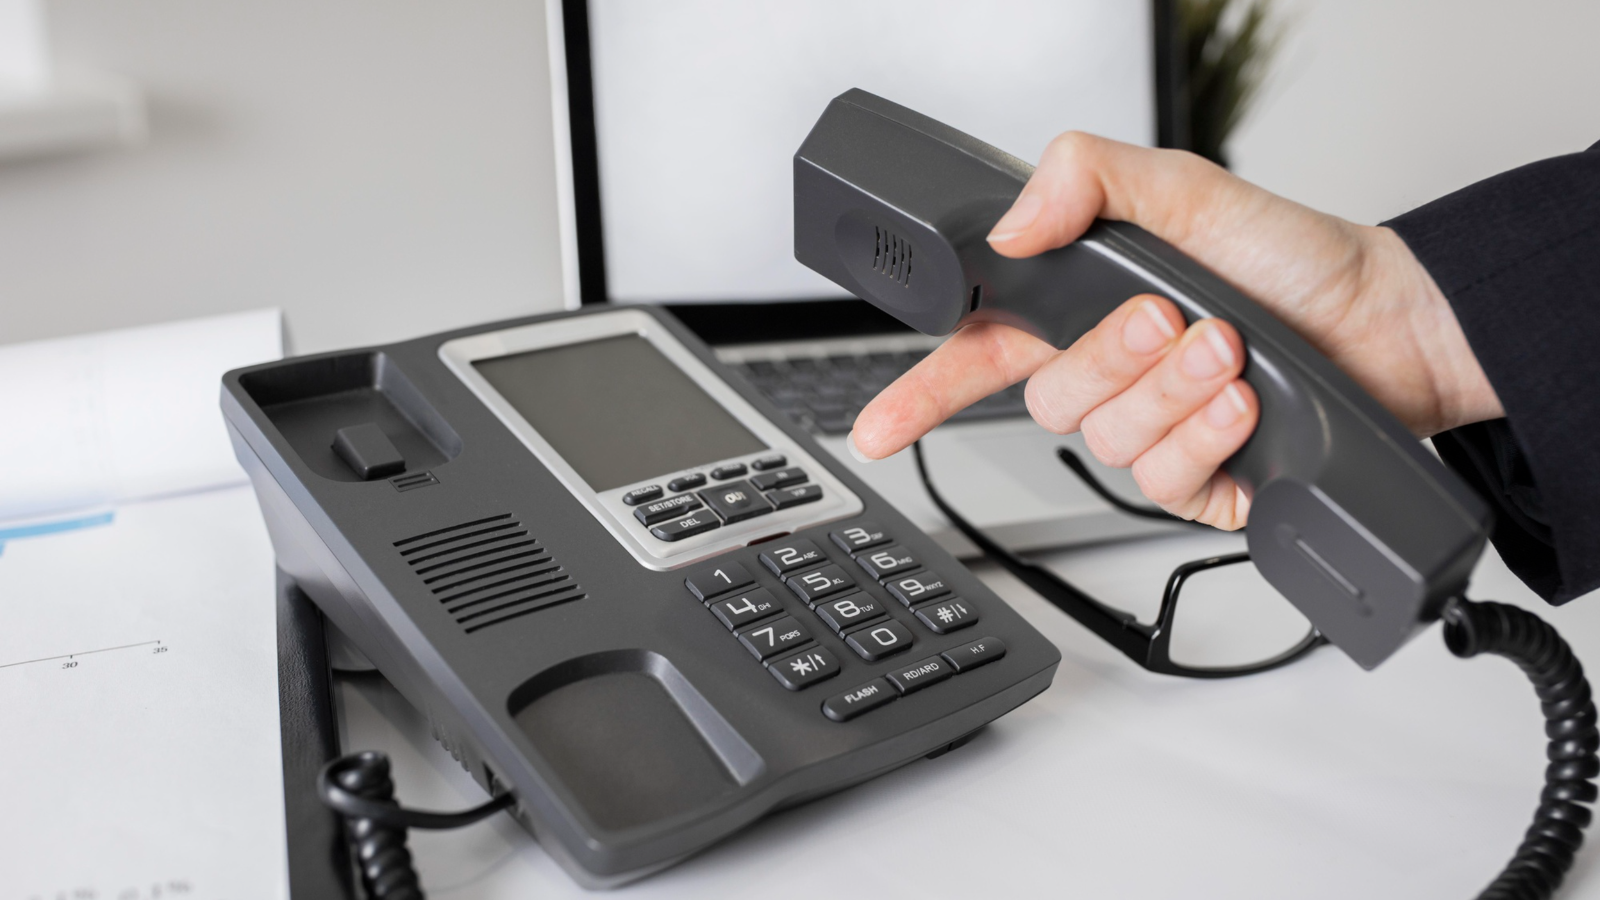 A VoIP device that upgrades the business phone system for a company